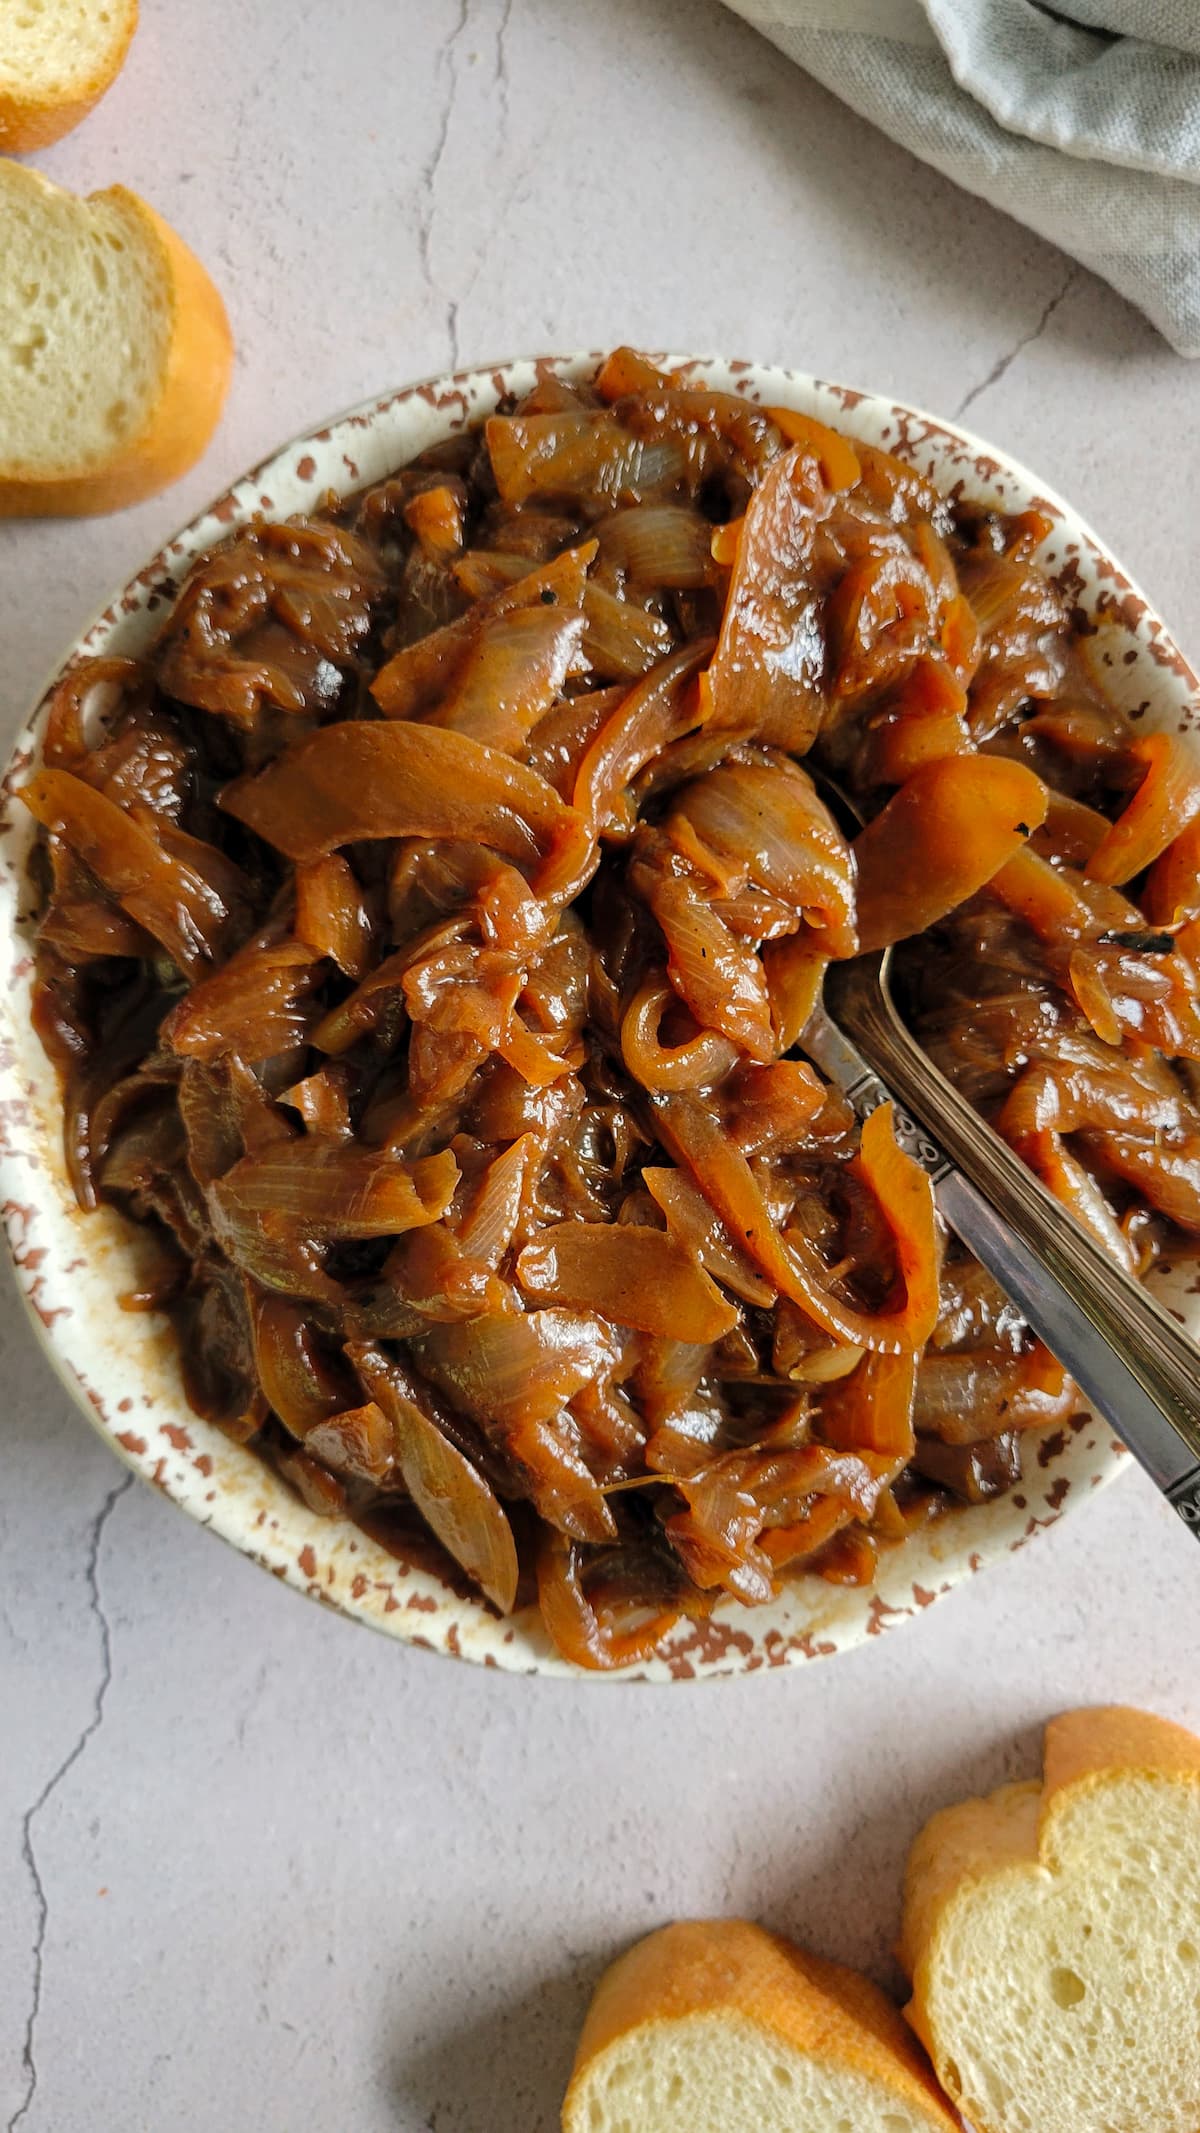 bowl of caramelised onions with a spoon in it, sliced bread on the side